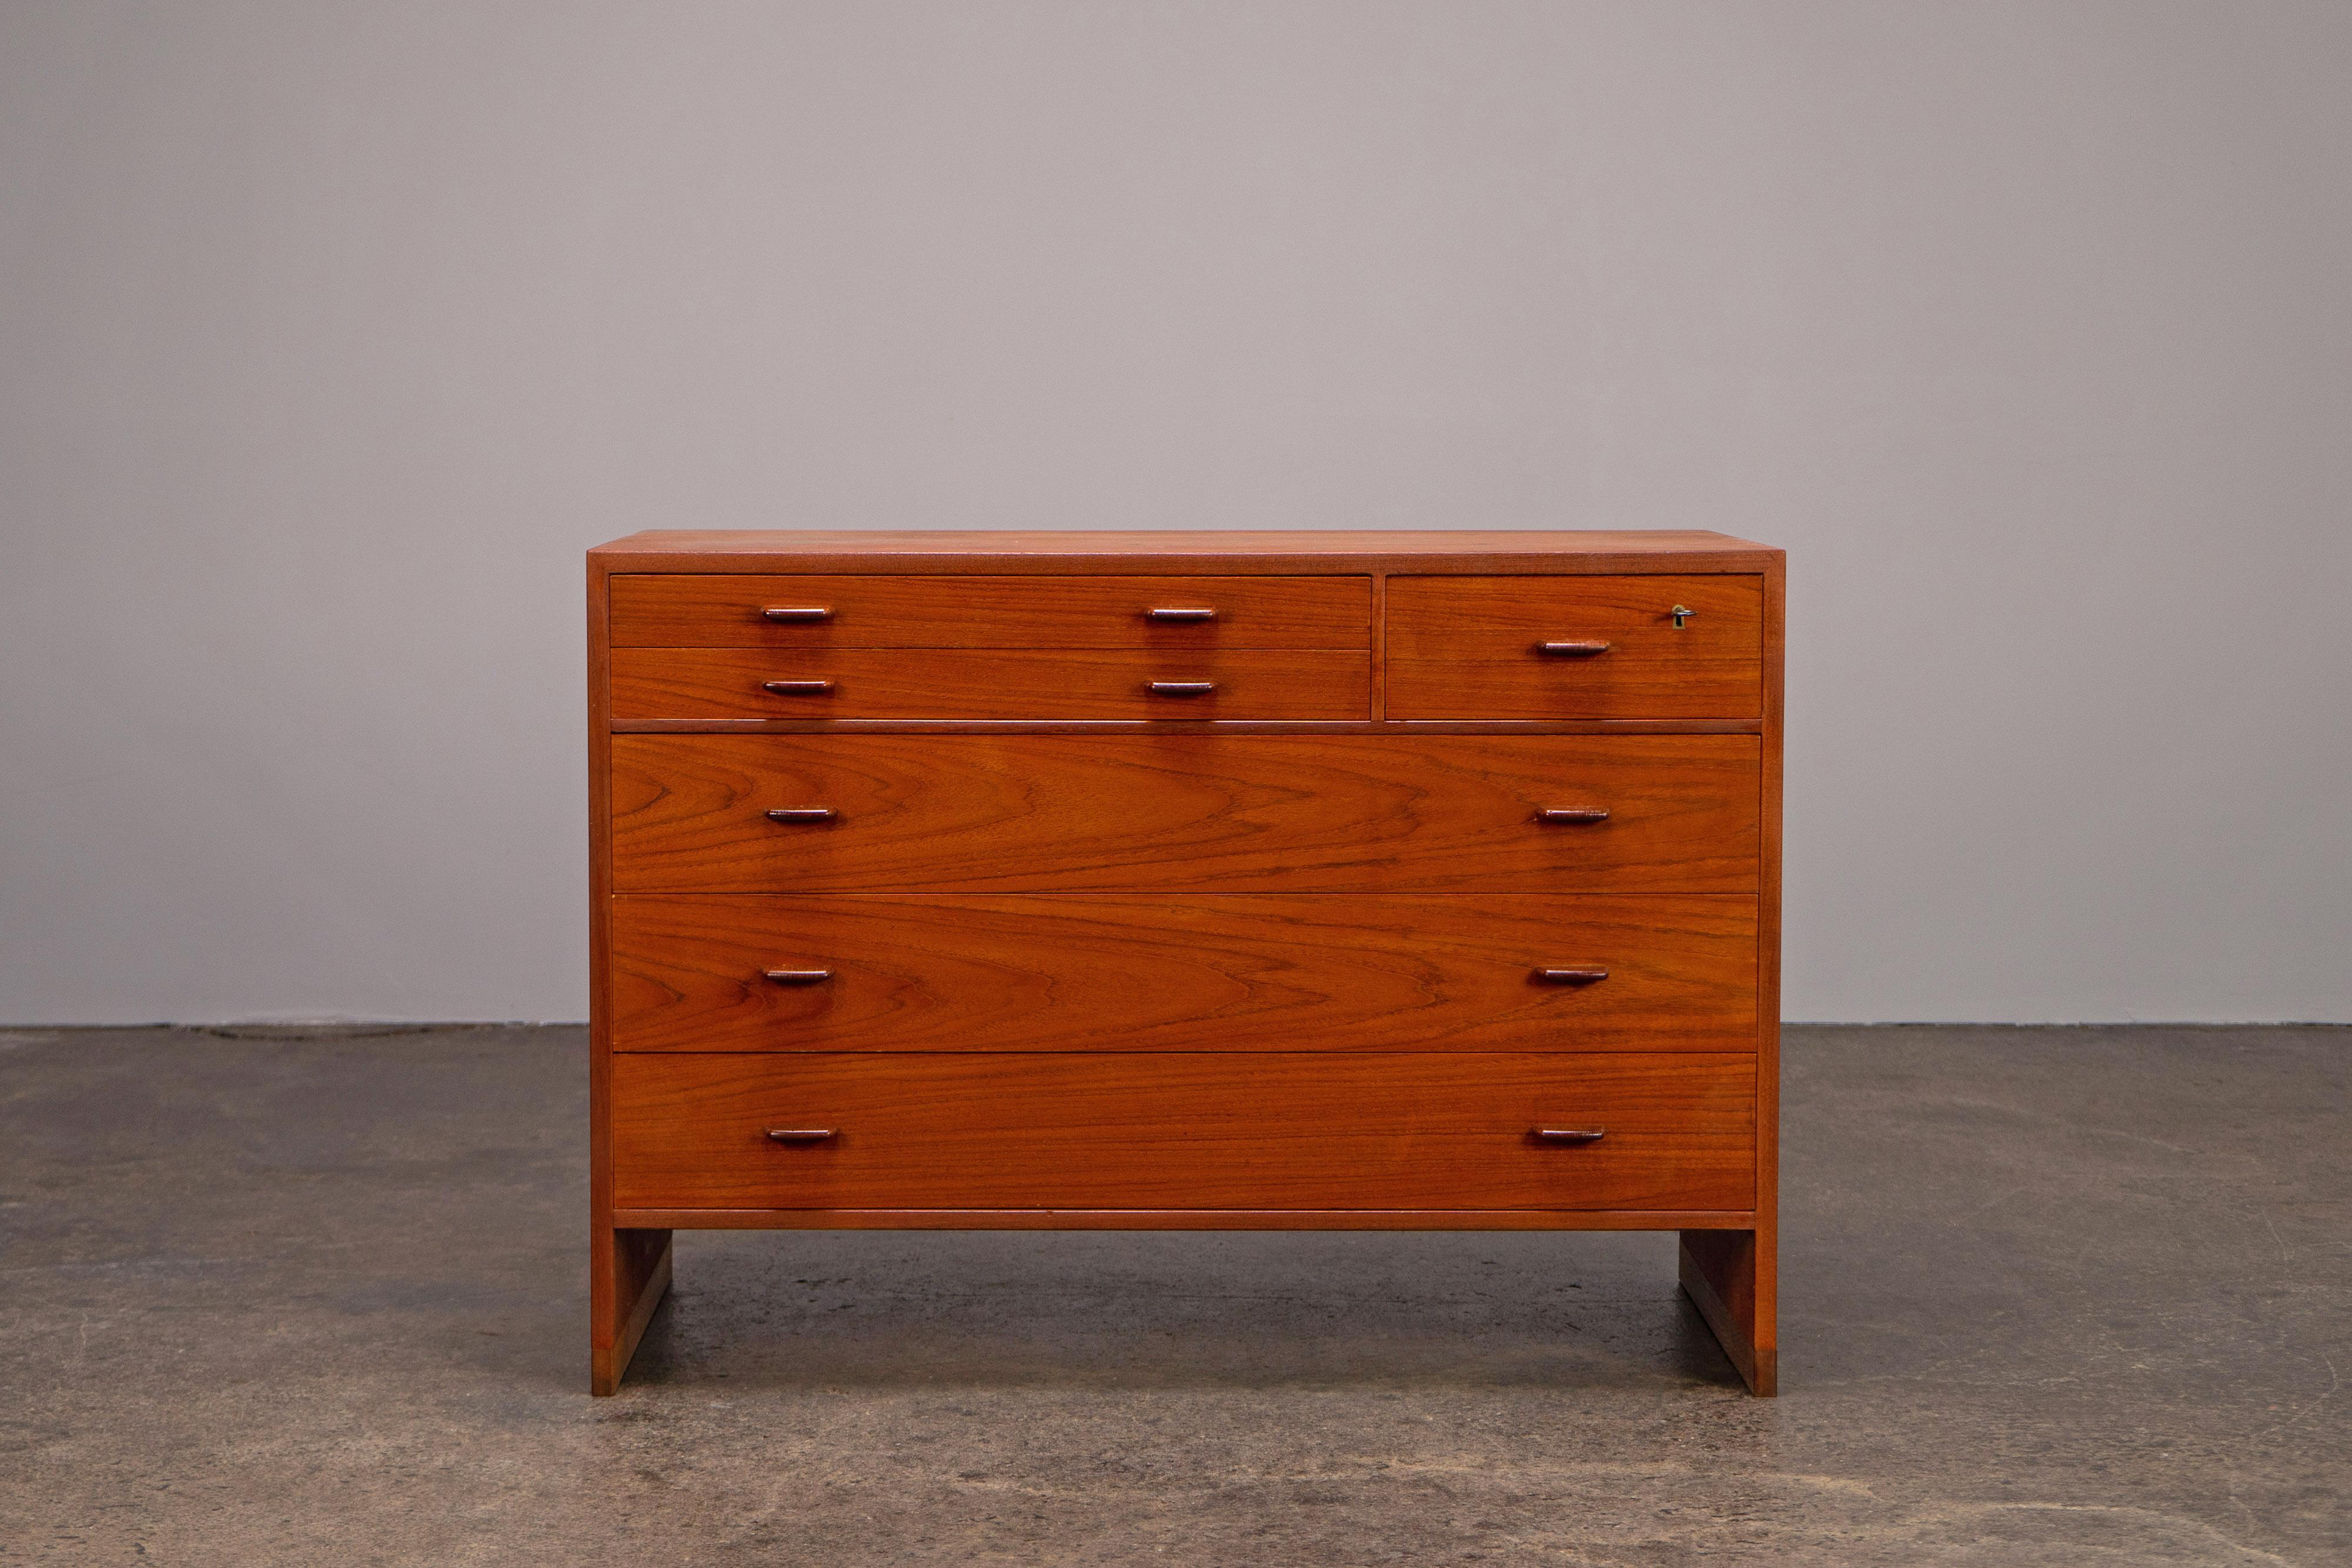 Chest of drawers by Hans J. Wegner, made in Denmark 1956. The body is made with teak, on oak runners. Fully restored condition.